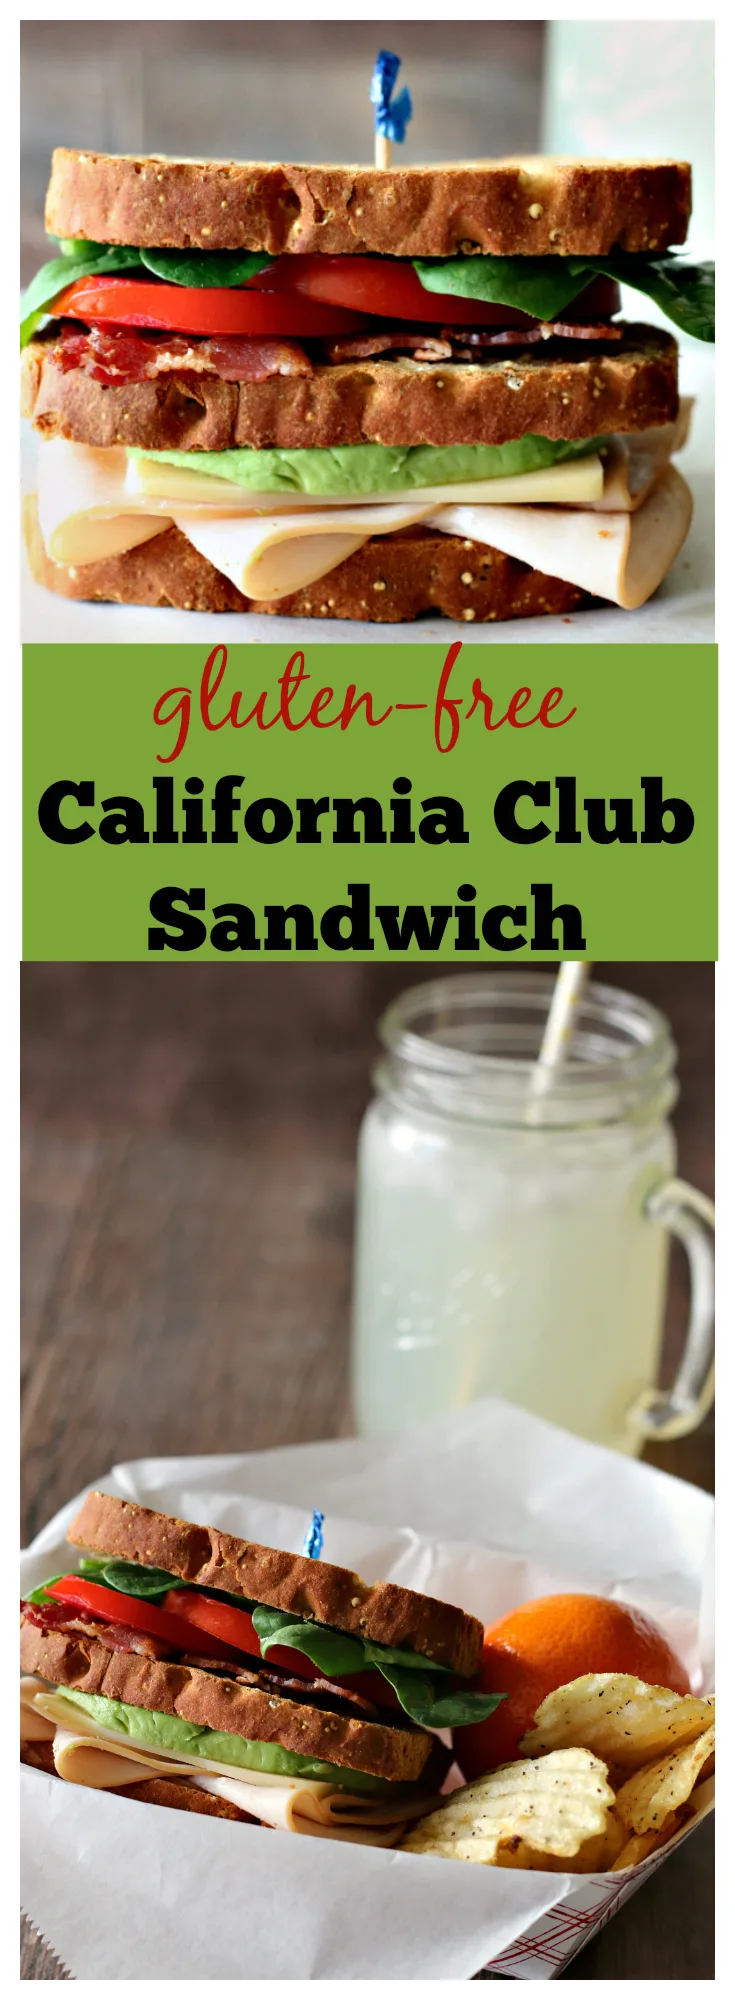 Gluten-free California Club Sandwich Recipe - This was a hit with the whole family. Reminds me of eating at the local diner as a kid!